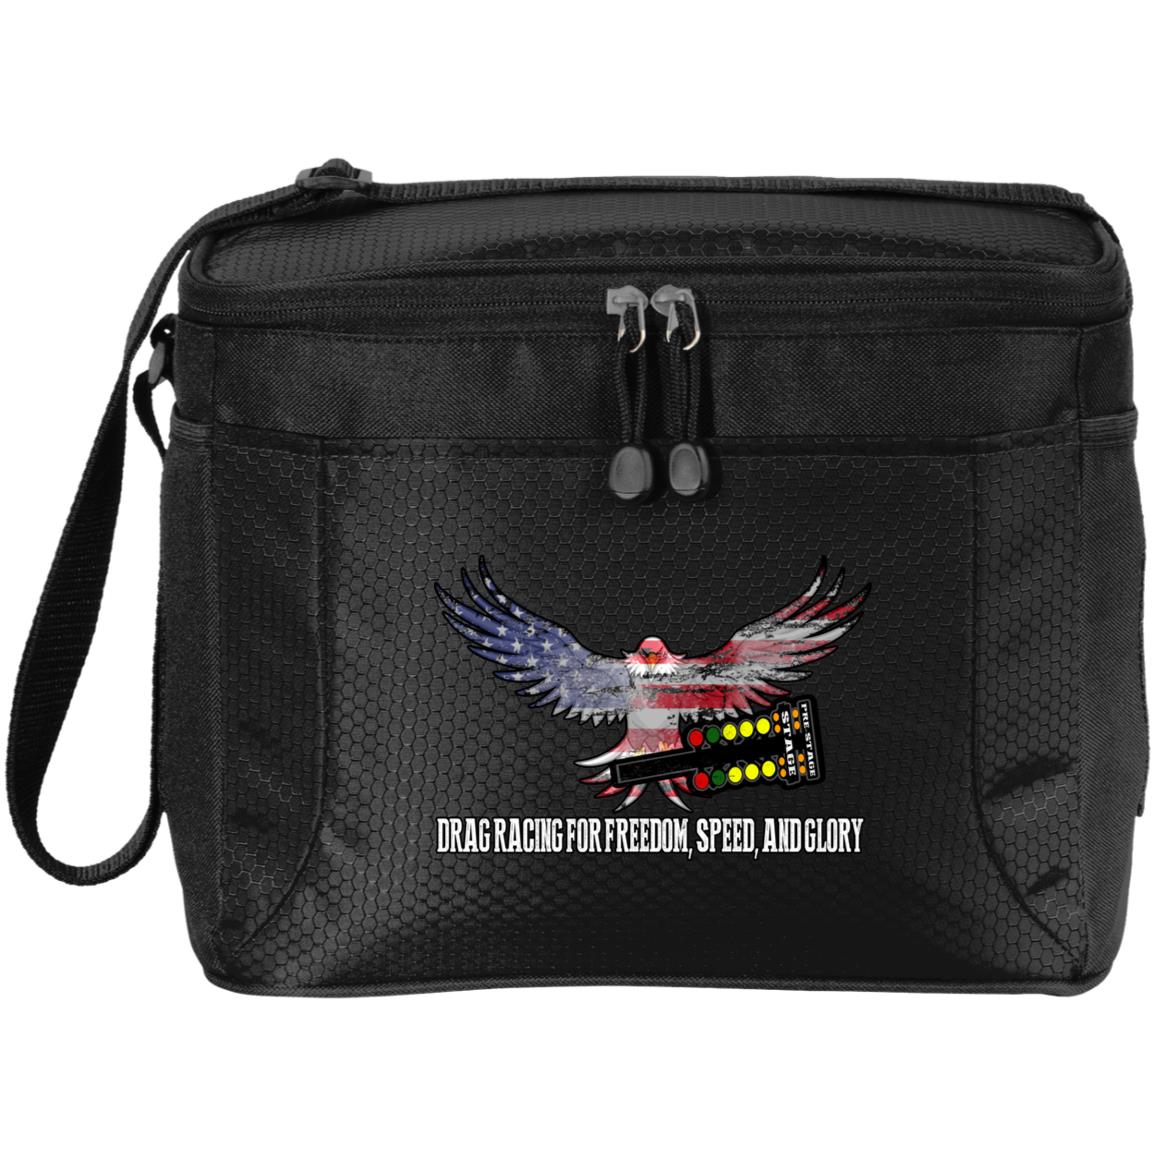 Drag Racing for Freedom, Speed, and Glory 12-Pack Cooler